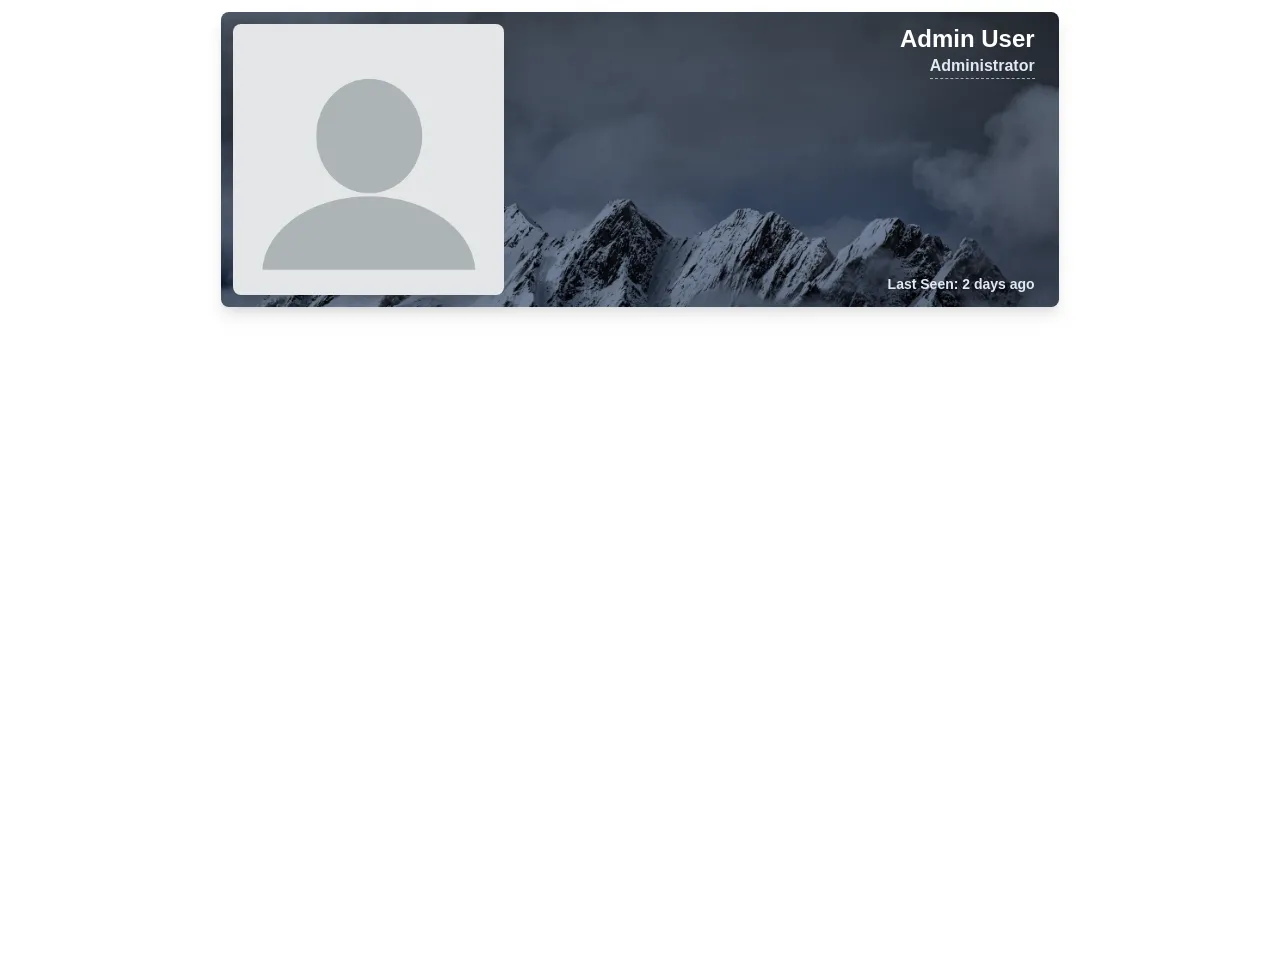 Profile Card With Image Background